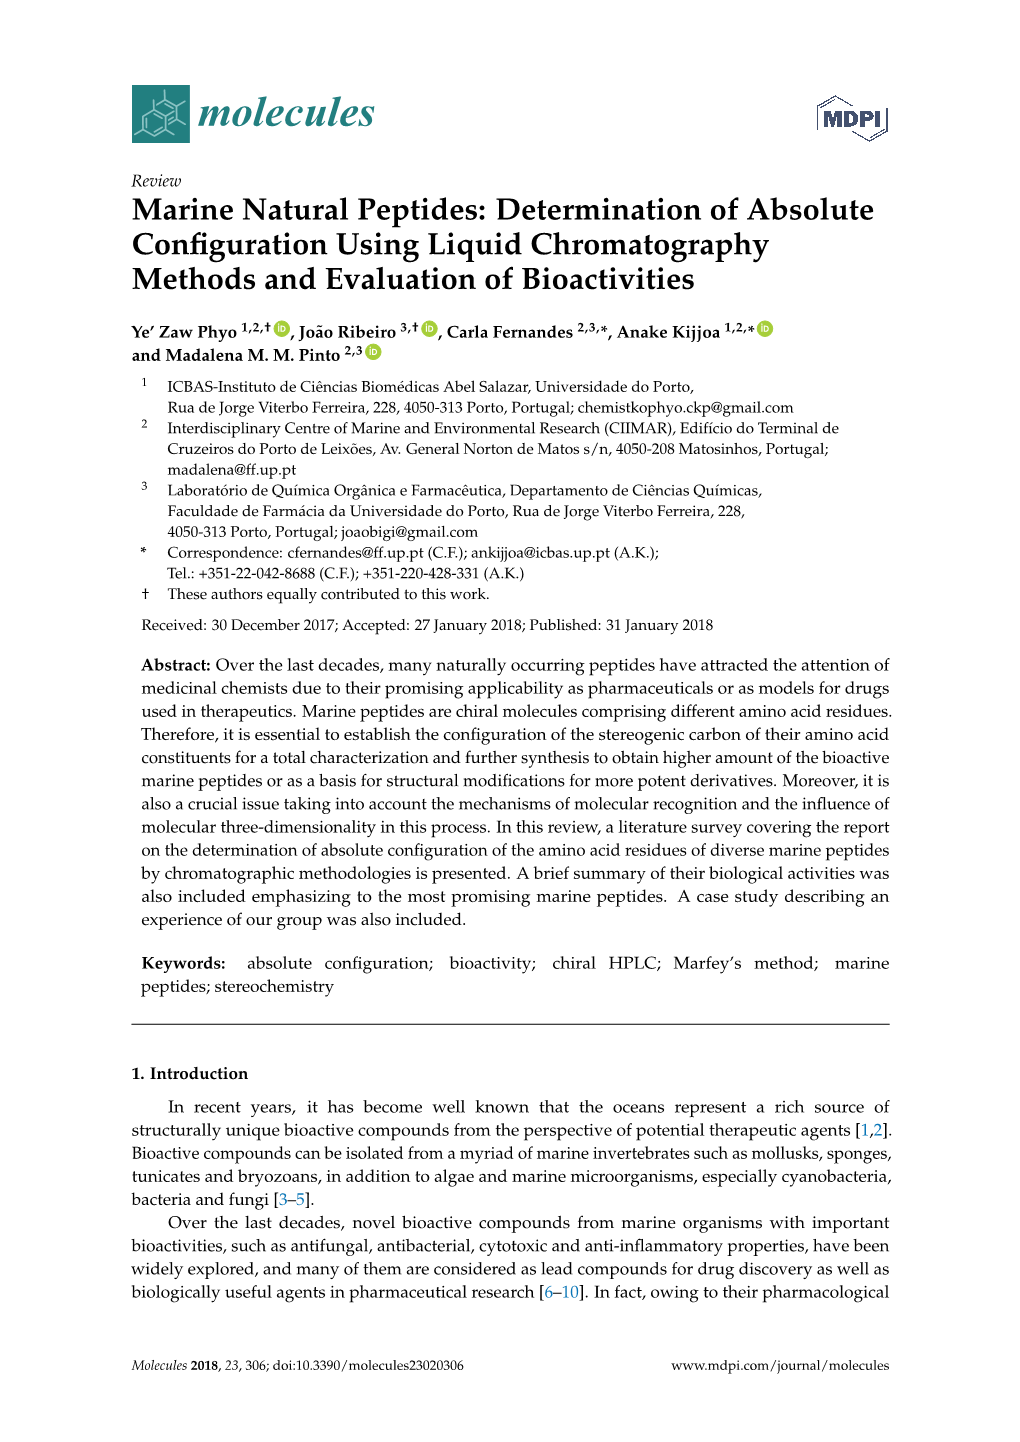 Marine Natural Peptides: Determination of Absolute Conﬁguration Using Liquid Chromatography Methods and Evaluation of Bioactivities